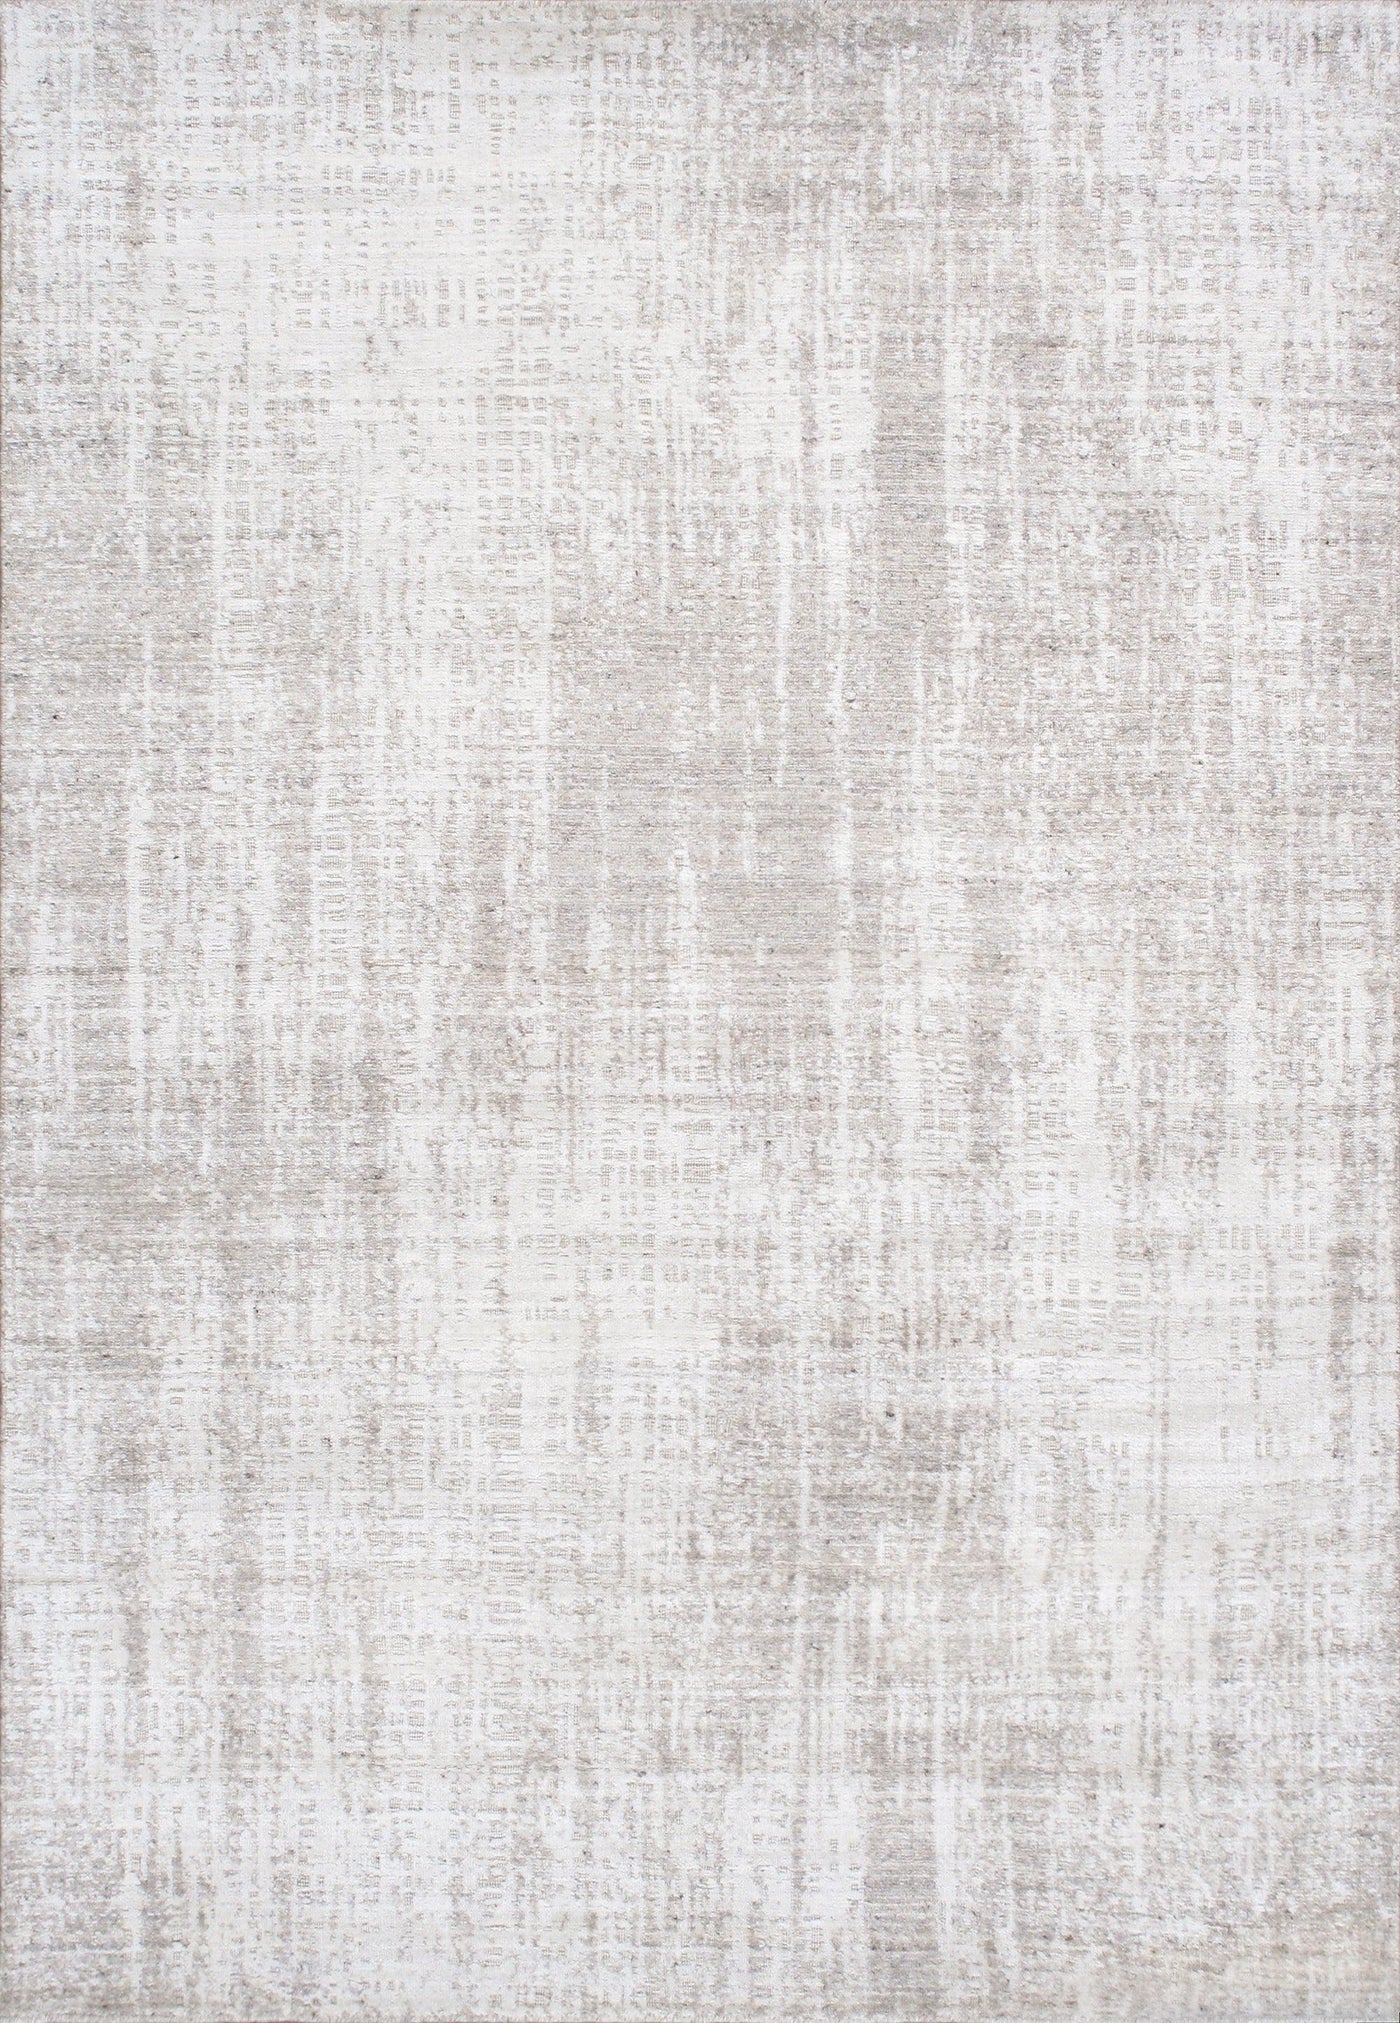 Canvello Amari Collection Hand-Loomed Bsilk & Wool Taupe Area Rug- 5' 3" X 7' 8" canvellollc